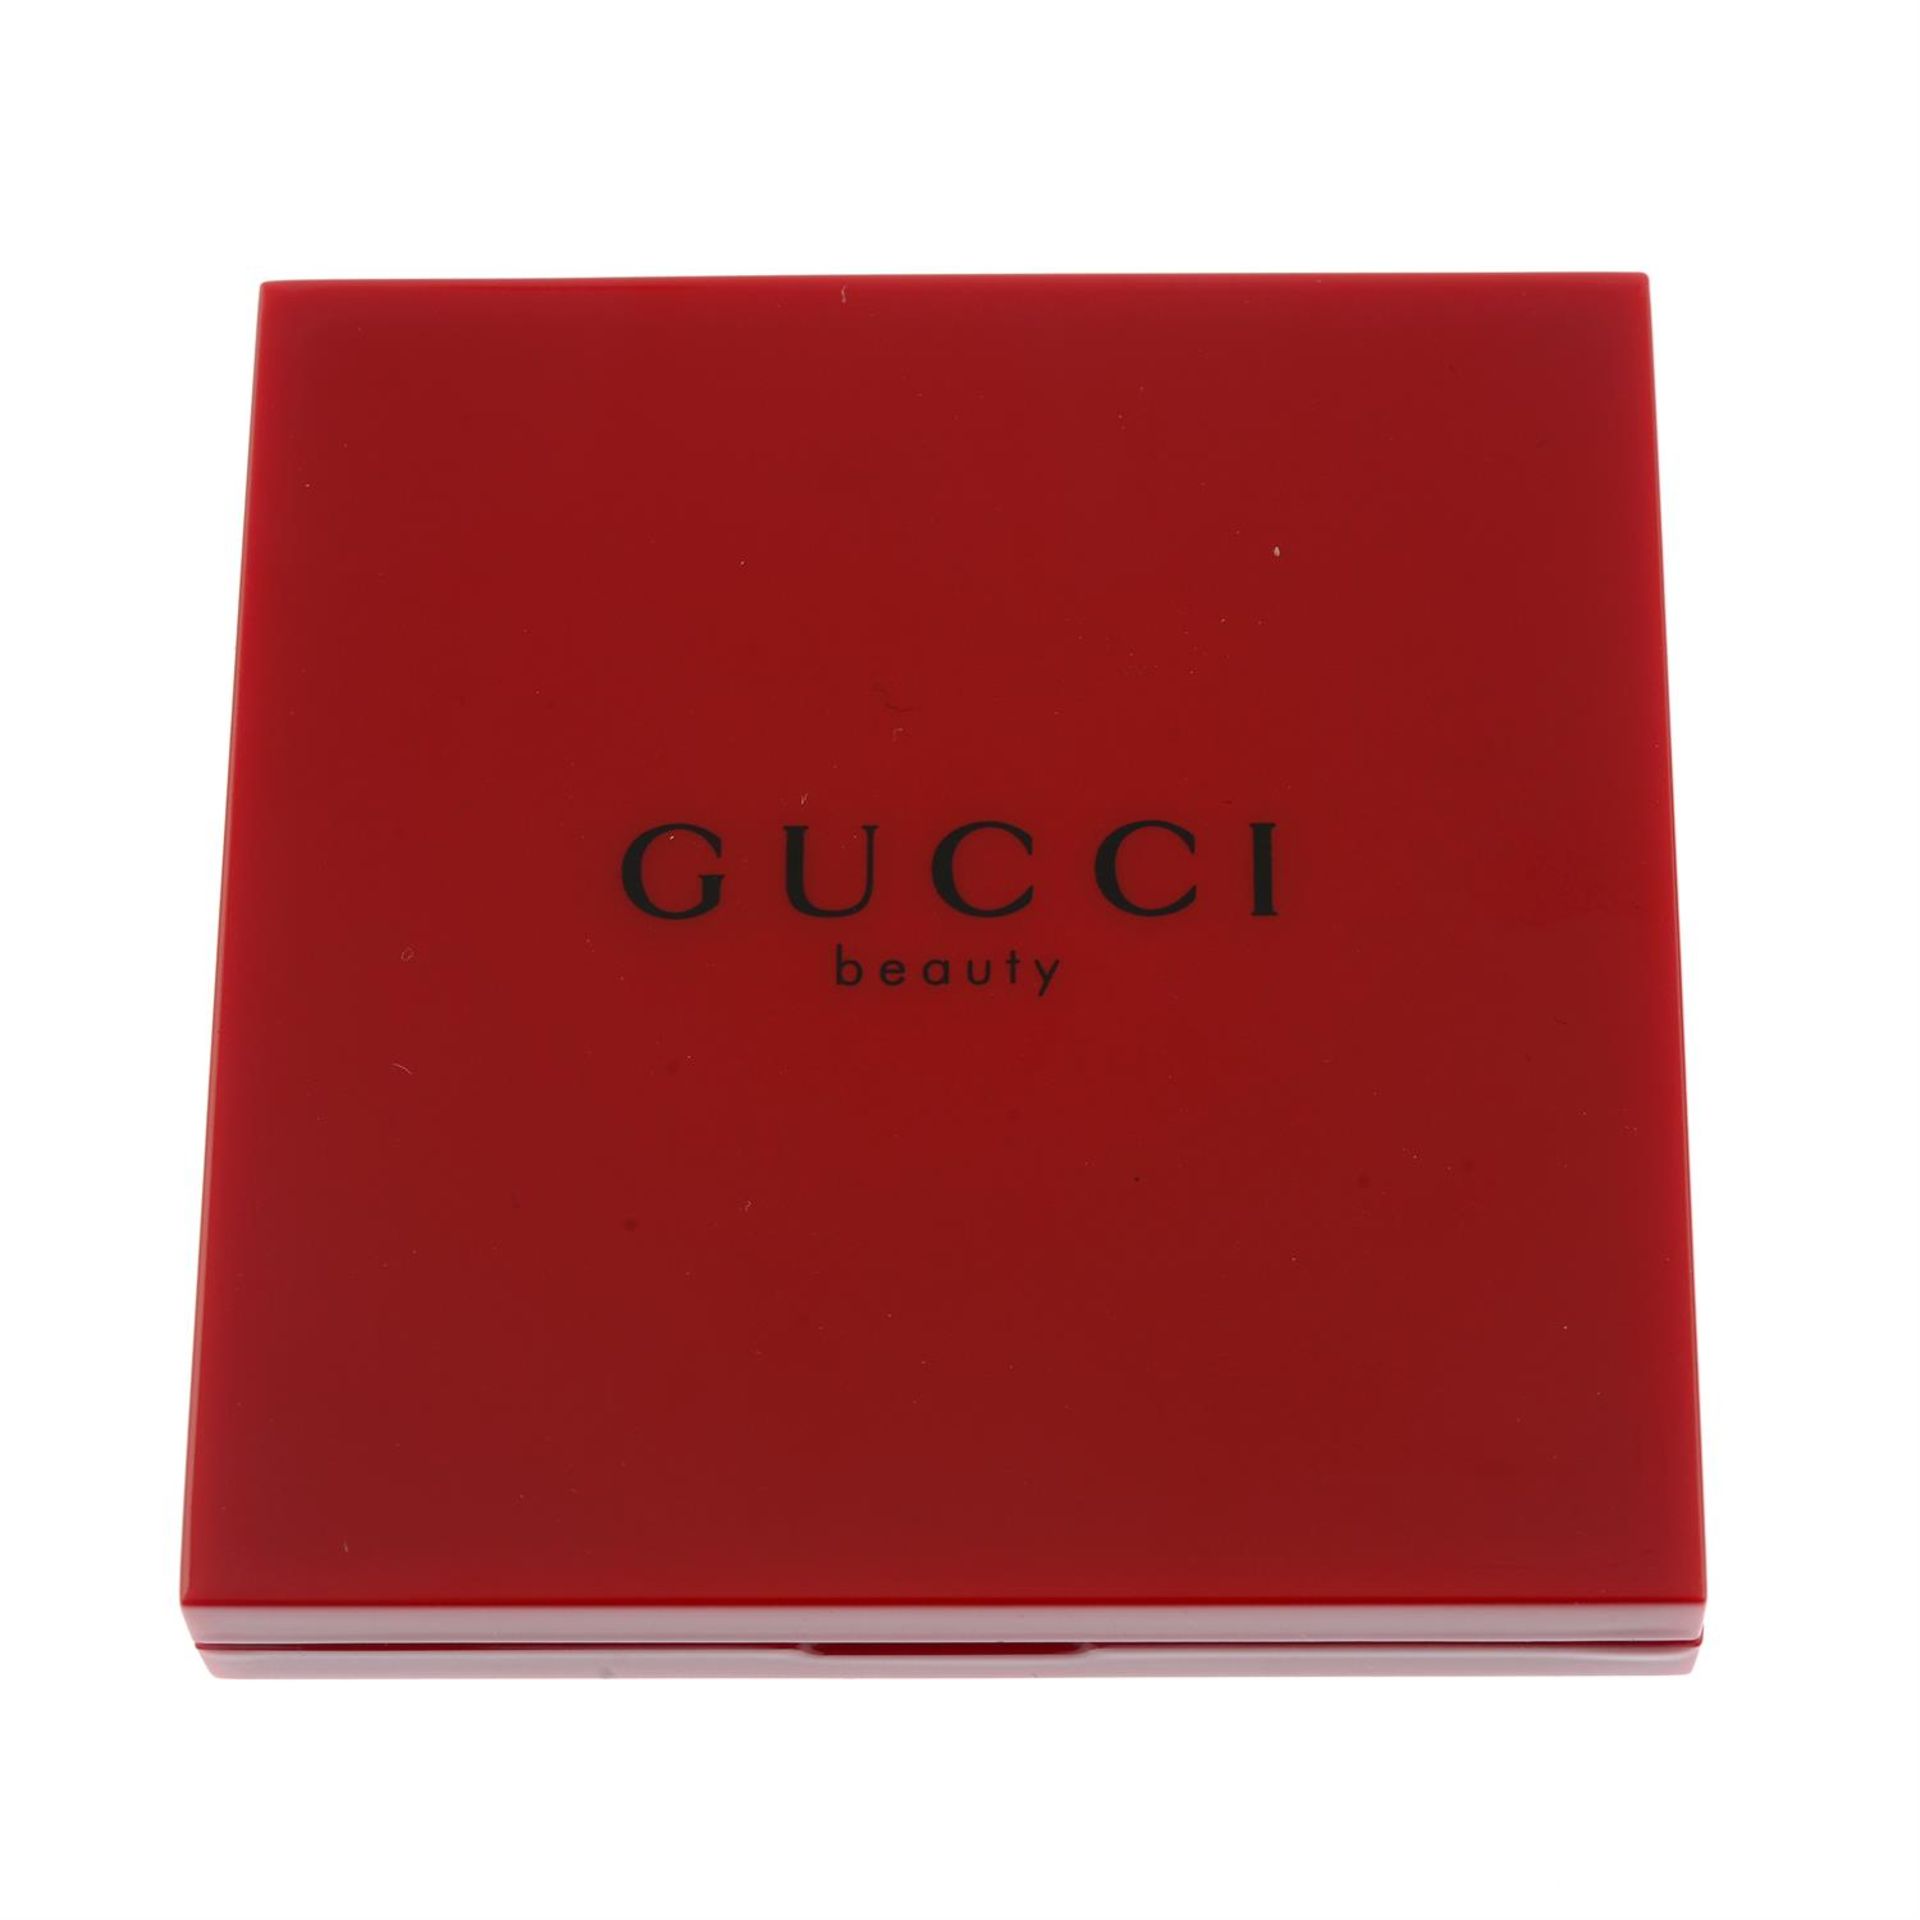 GUCCI - a red compact mirror.